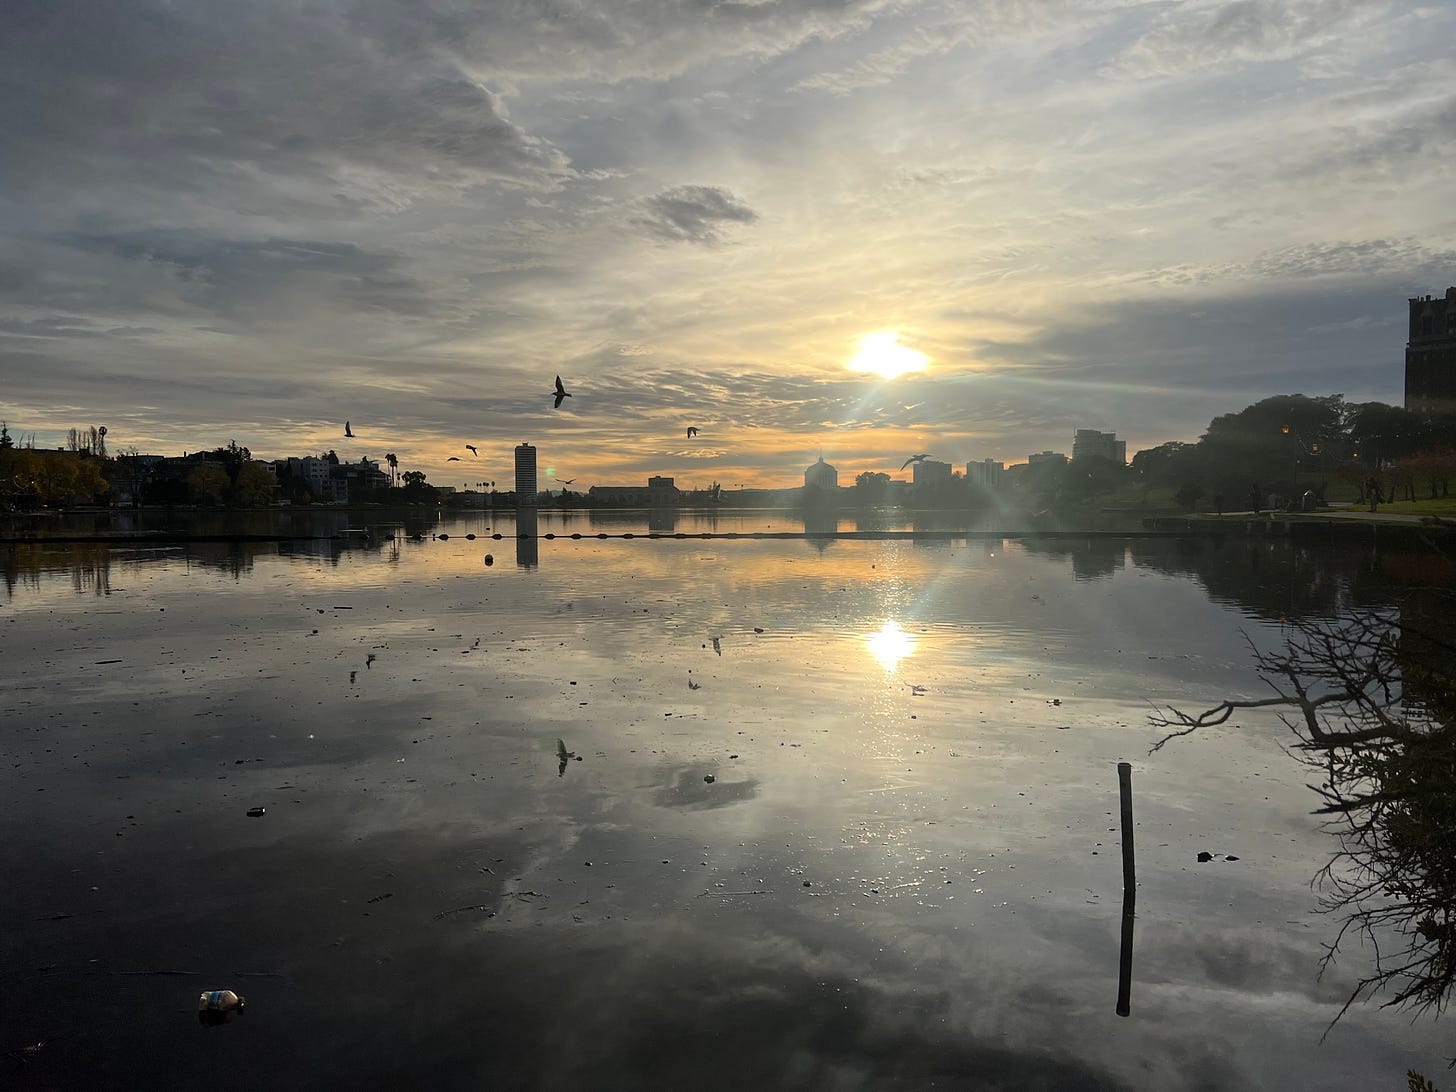 a shot of lake merritt, a large man-made body of water, in Oakland, CA. the sun peeks through the clouds, birds fly in the sky, and buildings are visible along the horizon. 